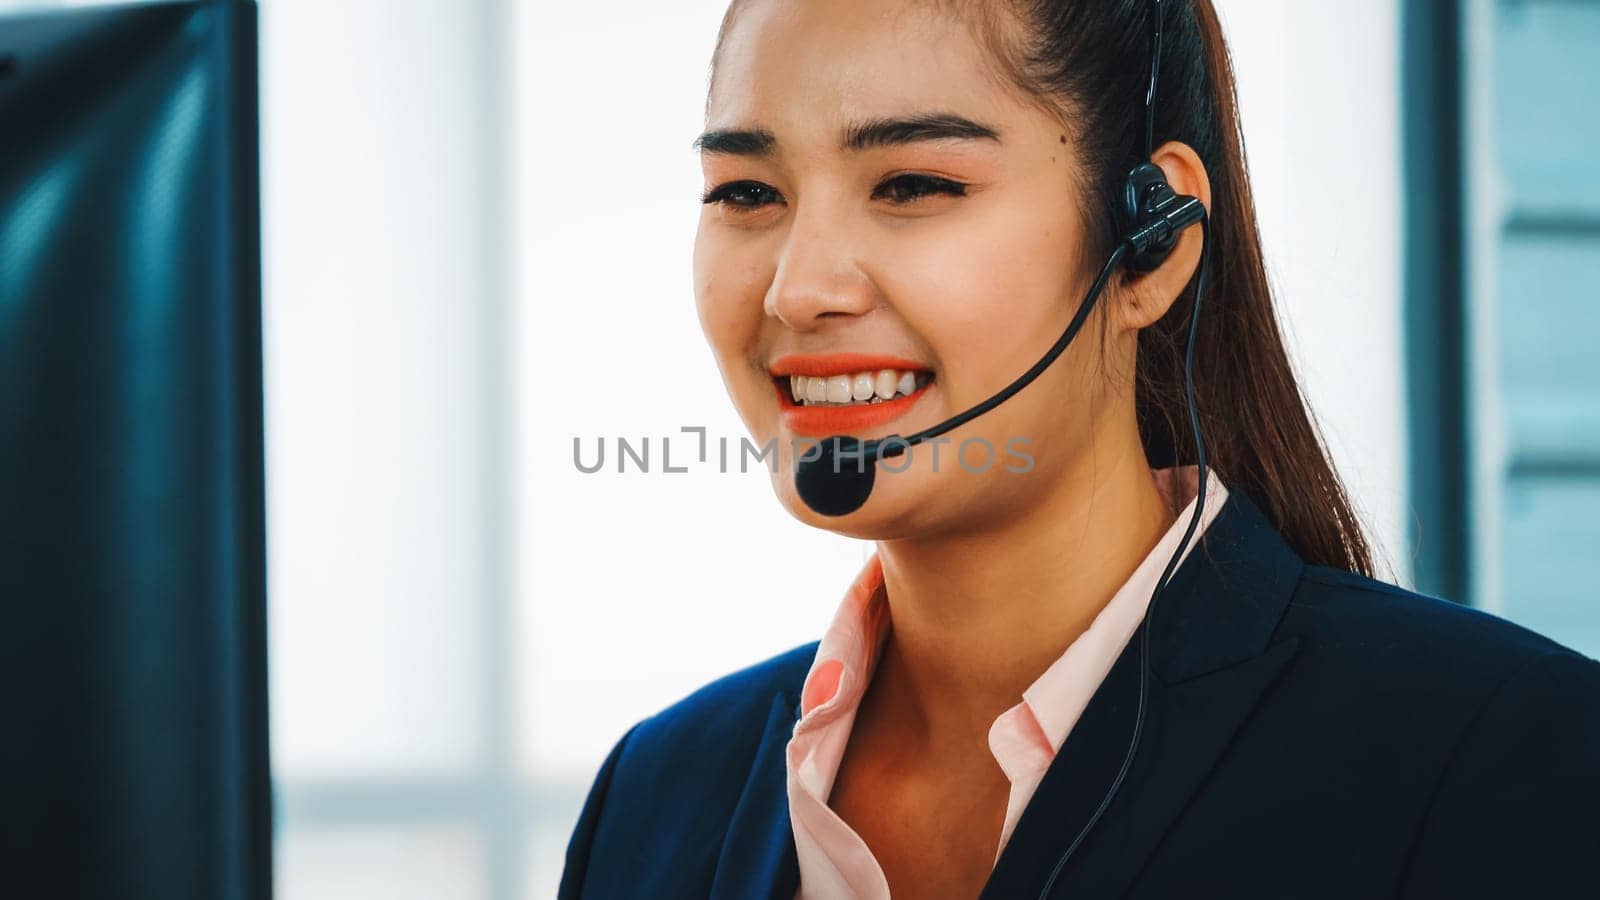 Business people wearing headset working in office Jivy by biancoblue